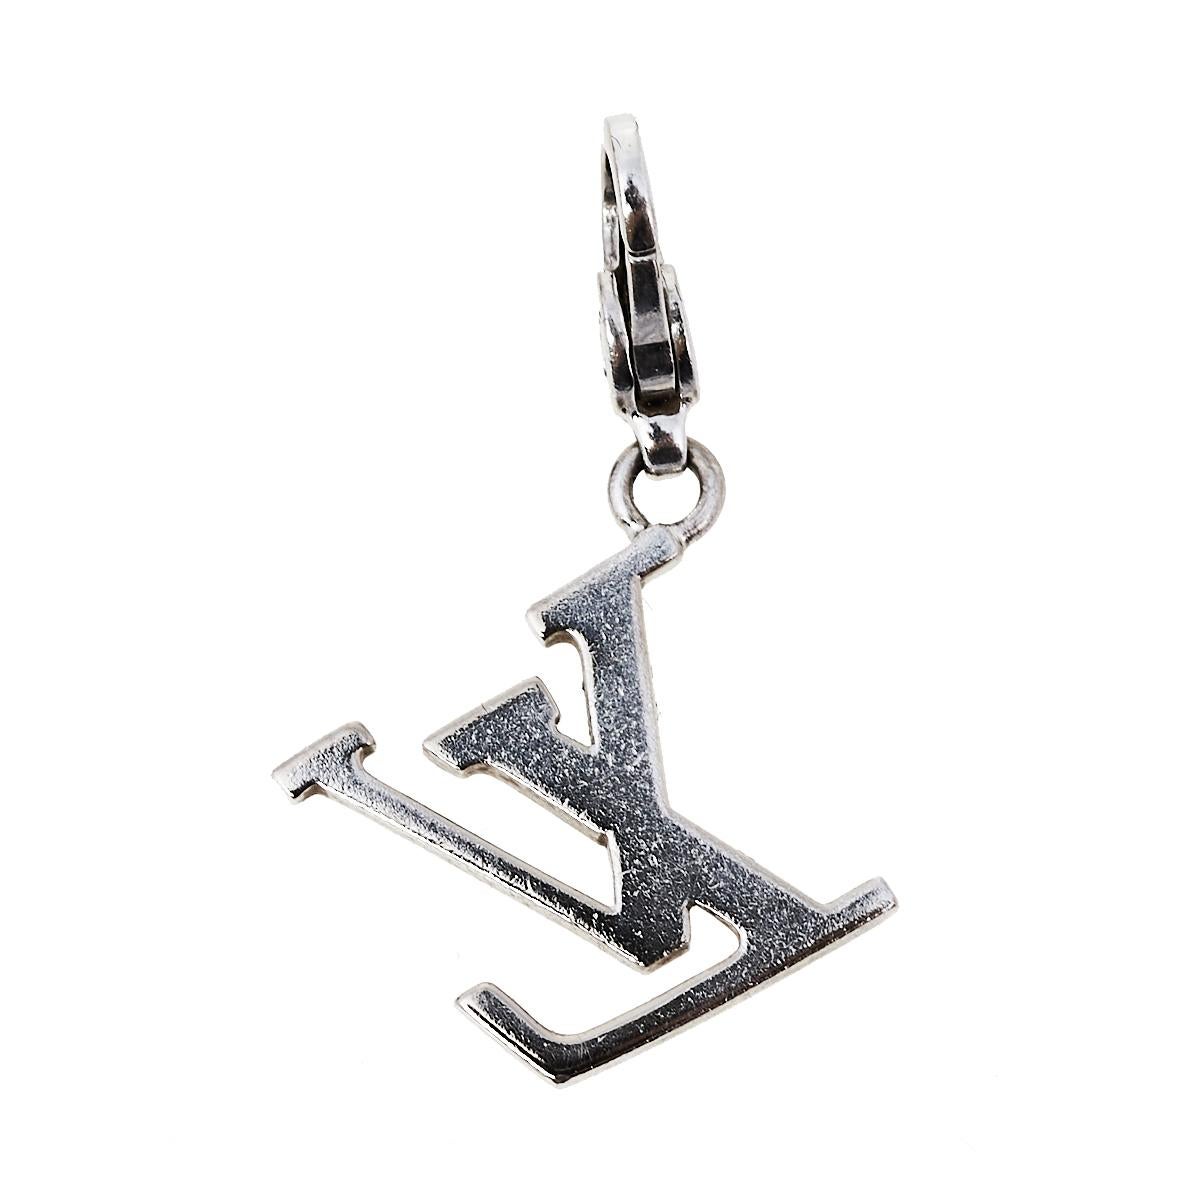 Charms always add more character to anything that it is attached to. Flaunt your love for the brand with this gorgeous charm in the brand monogram made out of stunning 18k white gold. Glam up your bag or add it to your charm bracelet, as you